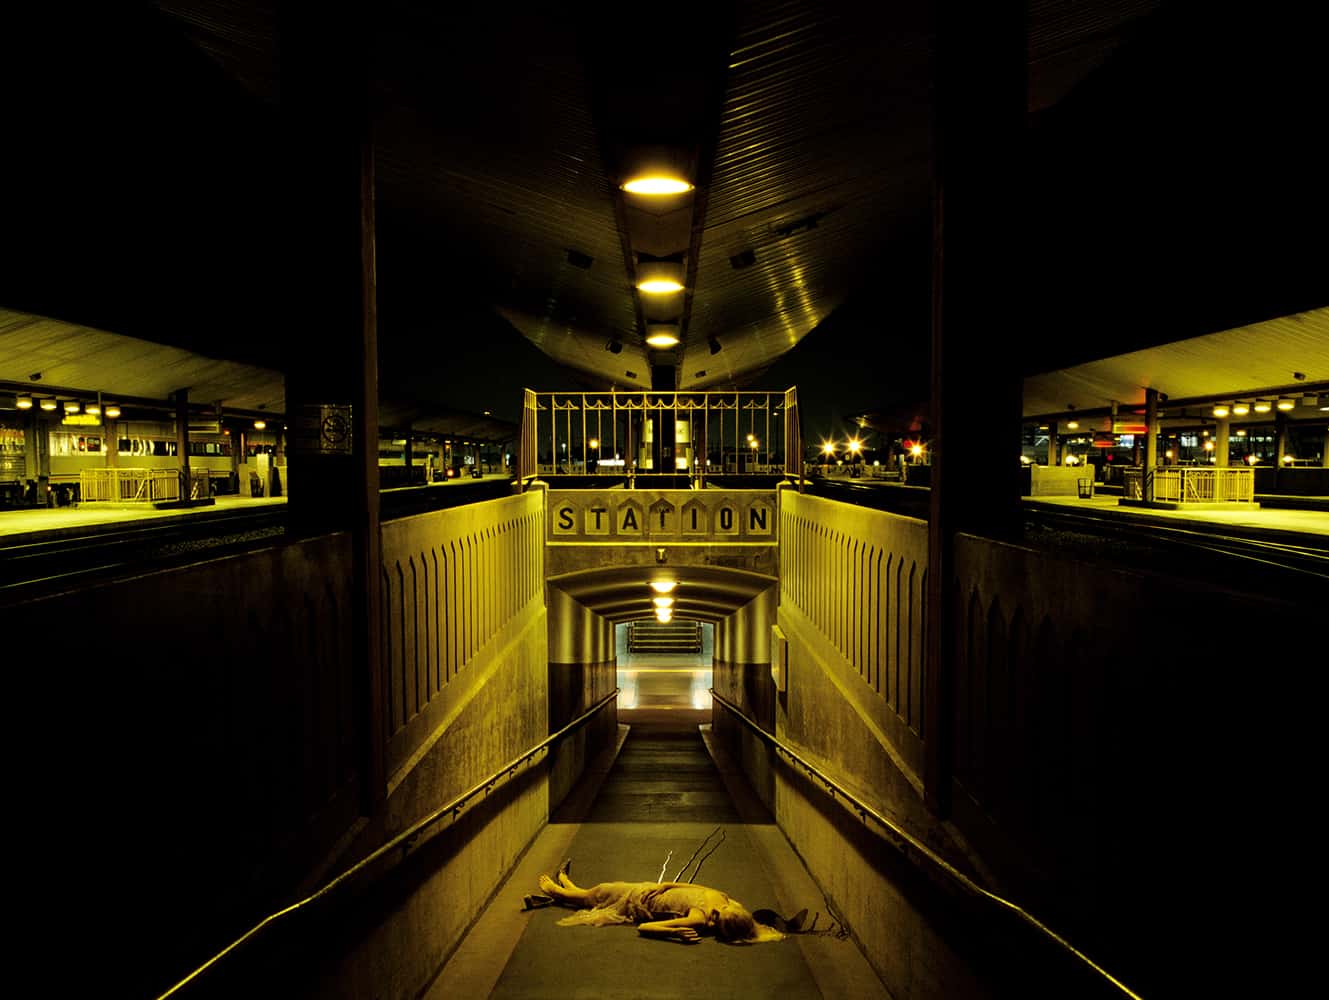 From Melanie Pullen’s art series of more than 100 recreations of crime scene photographs. Series was shot from 2003-2005